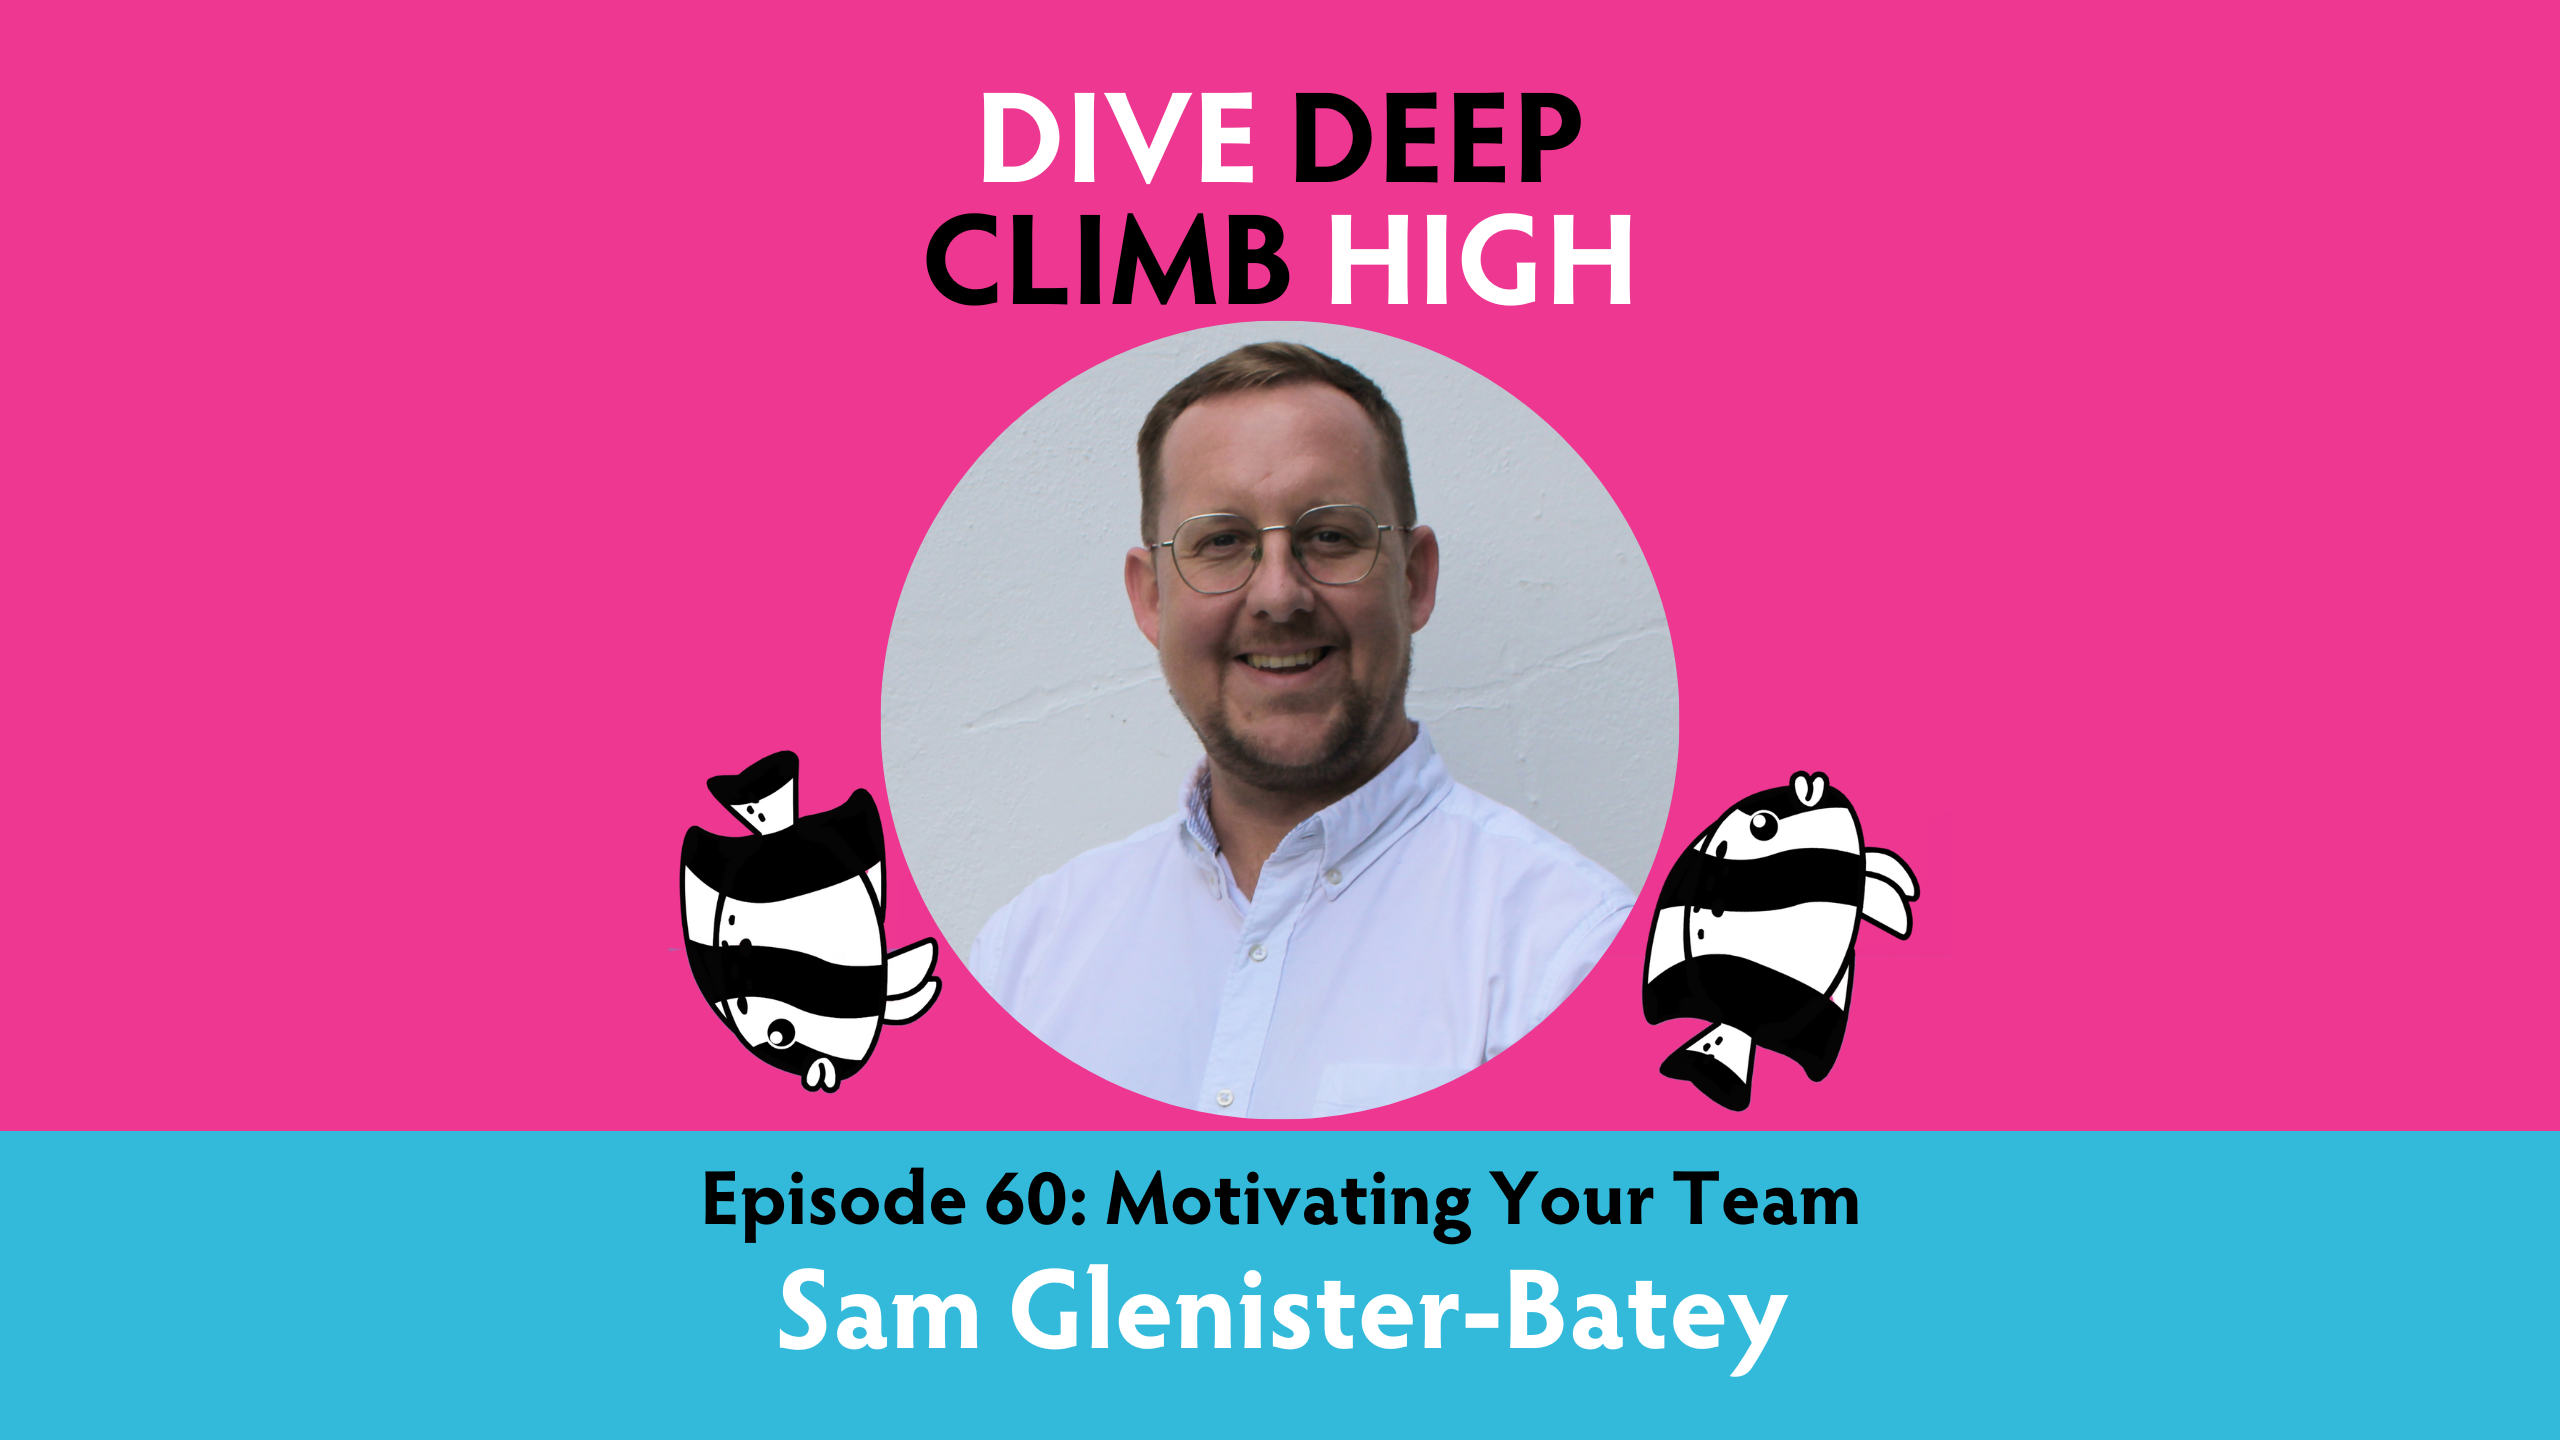 Dive Deep, Climb High podcast image with Sam Glenister-Batey